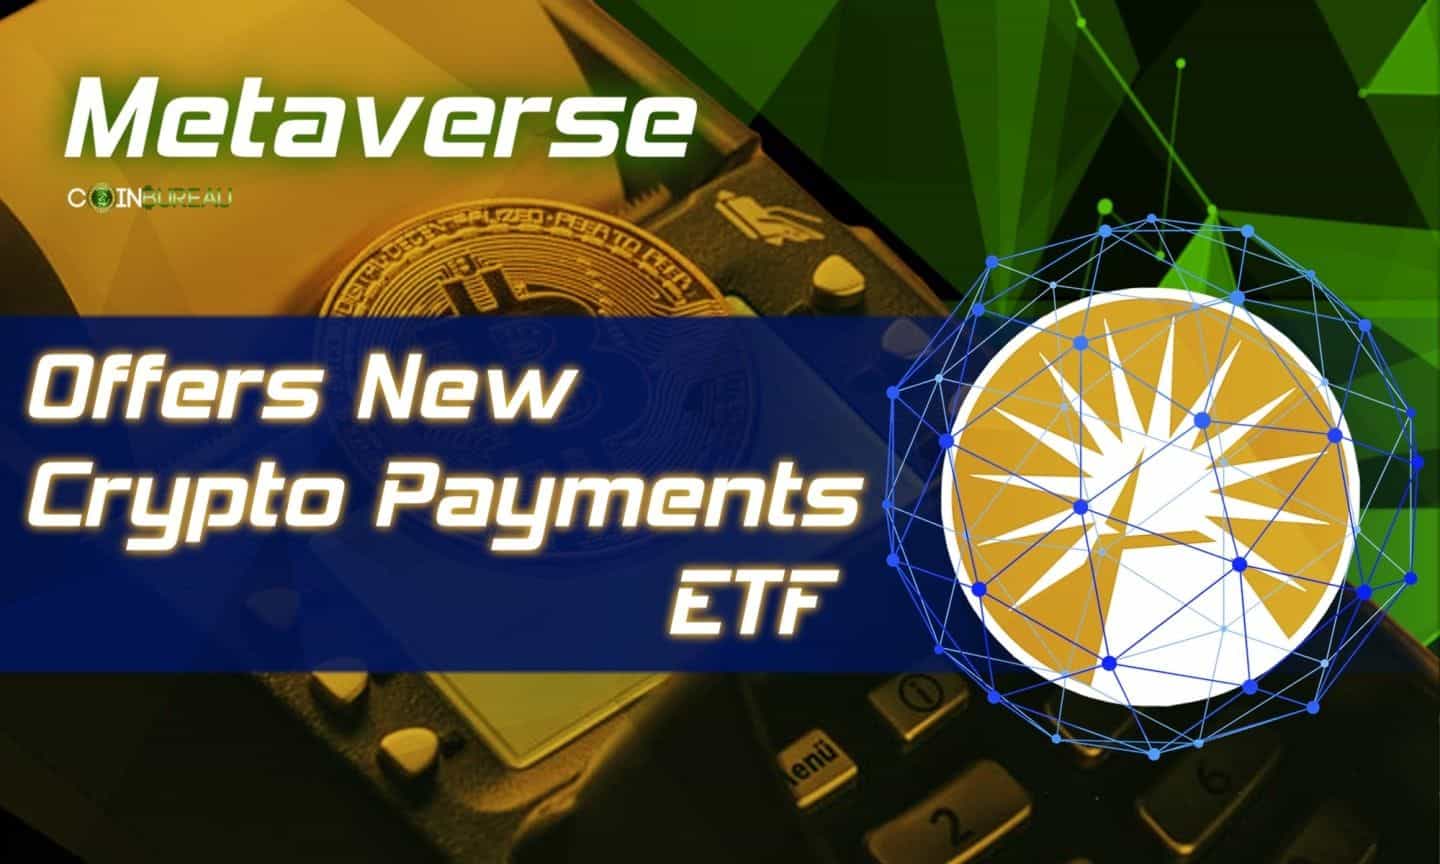 Investment Giant Fidelity Offers New Metaverse and Crypto Payments ETFs